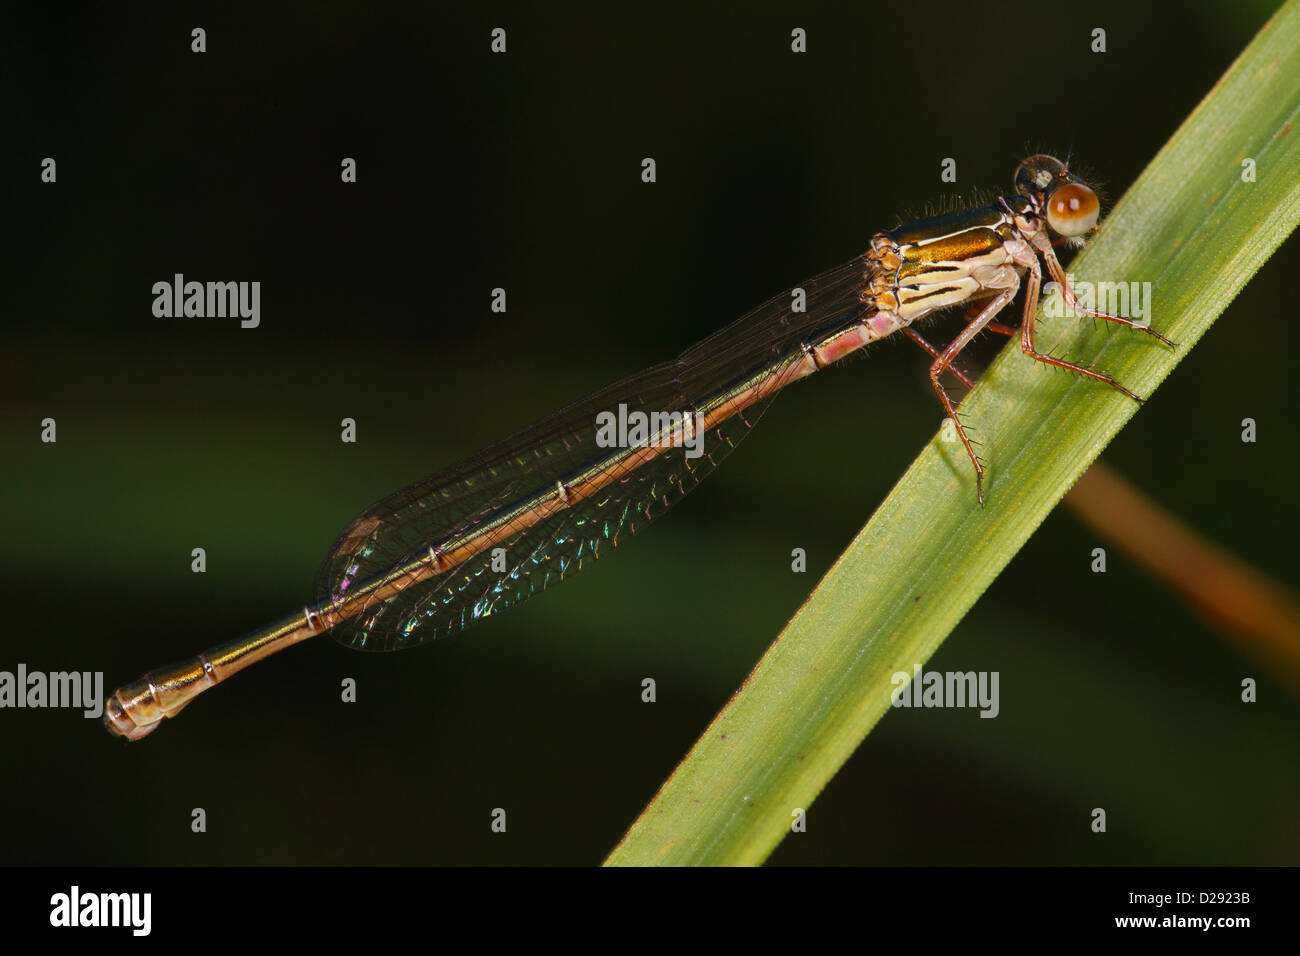 Willow Emerald Damselfly (Lestes [Chalcolestes] viridis) adult female perched on a leaf. Stock Photo